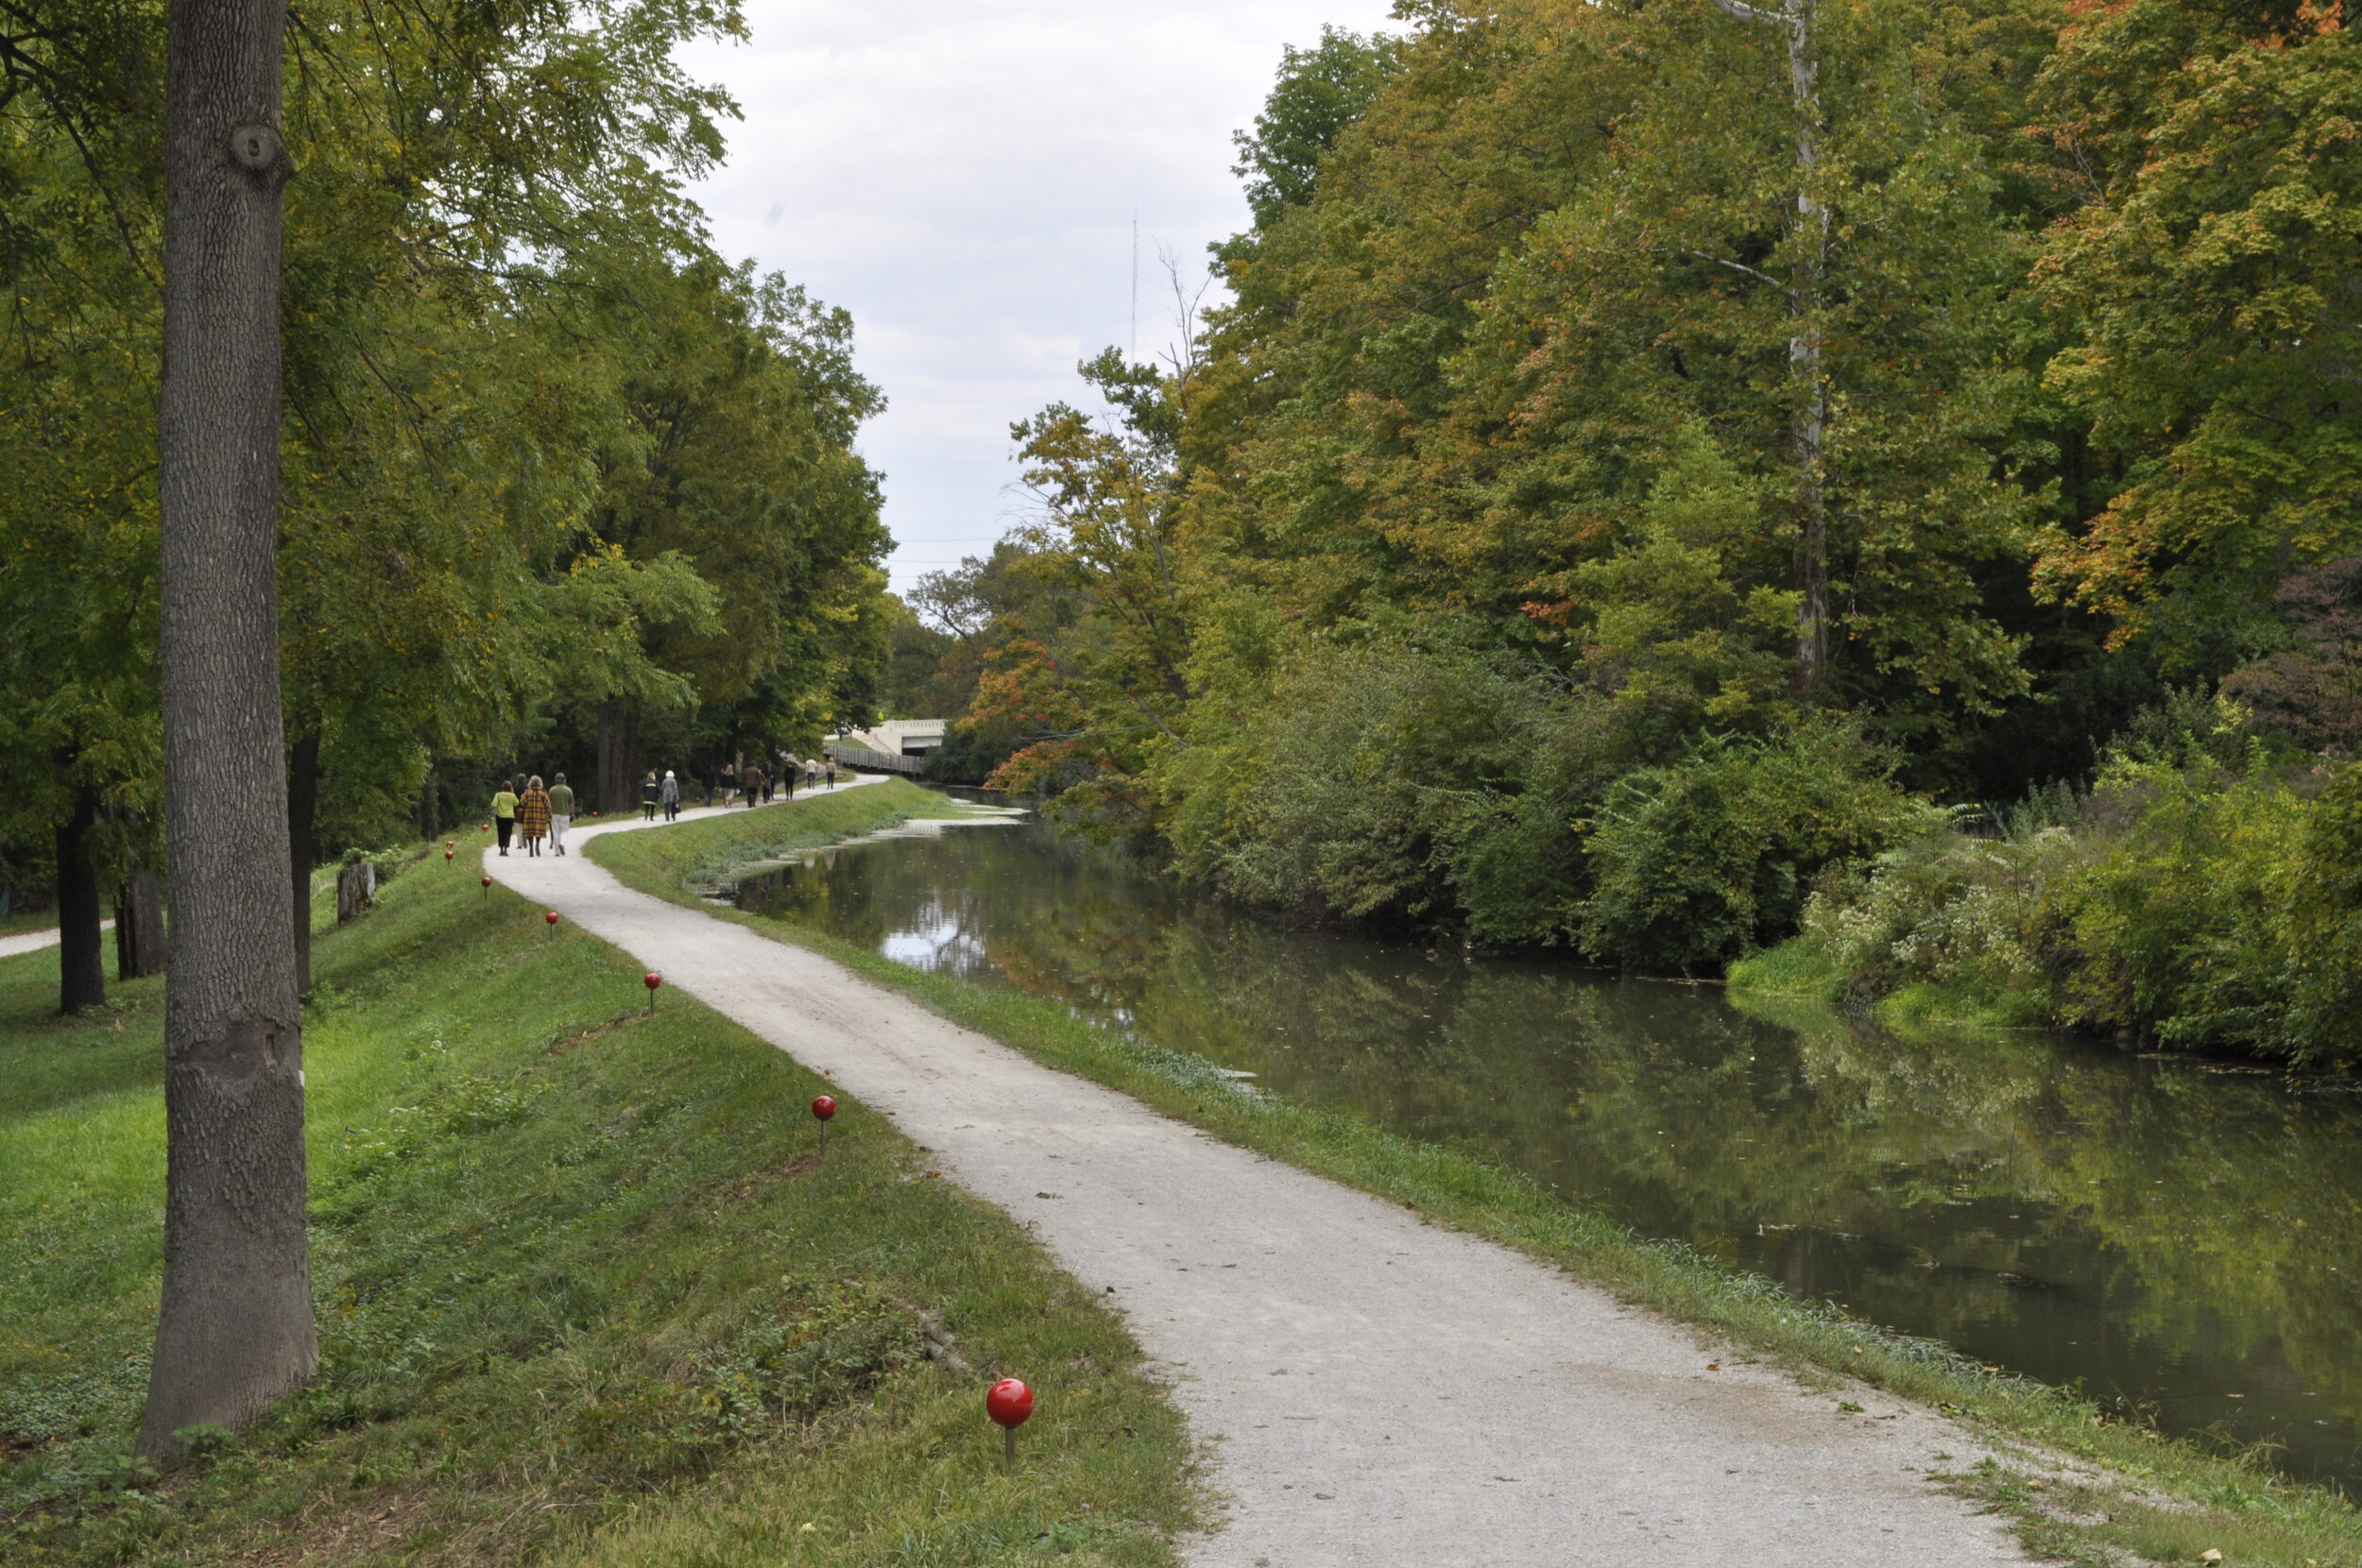  Along a 6-mile stretch of bike paths, parklands, and trails along the White River from Broad Ripple to White River State Park, approximately 100 markers situated viewers in the landscape and revealed different aspects of the river: the river’s histo